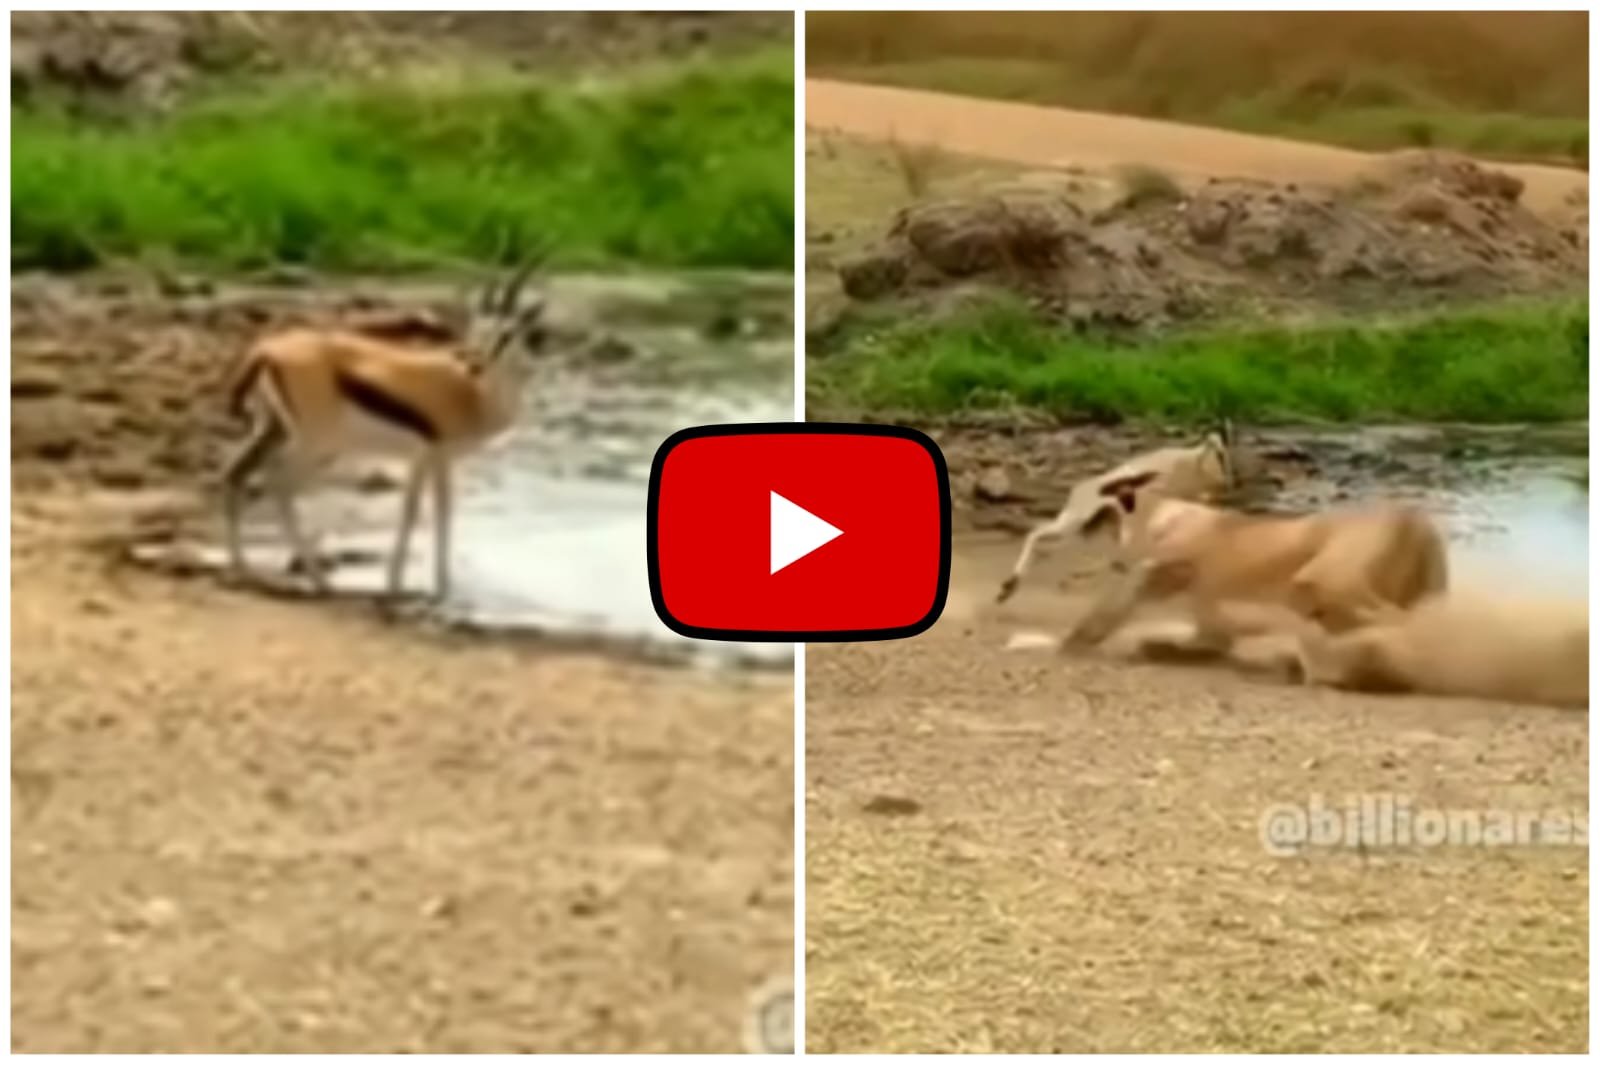 Deer and Lion Ka Video - The lion came to attack the deer drinking water at the speed of a bullet.